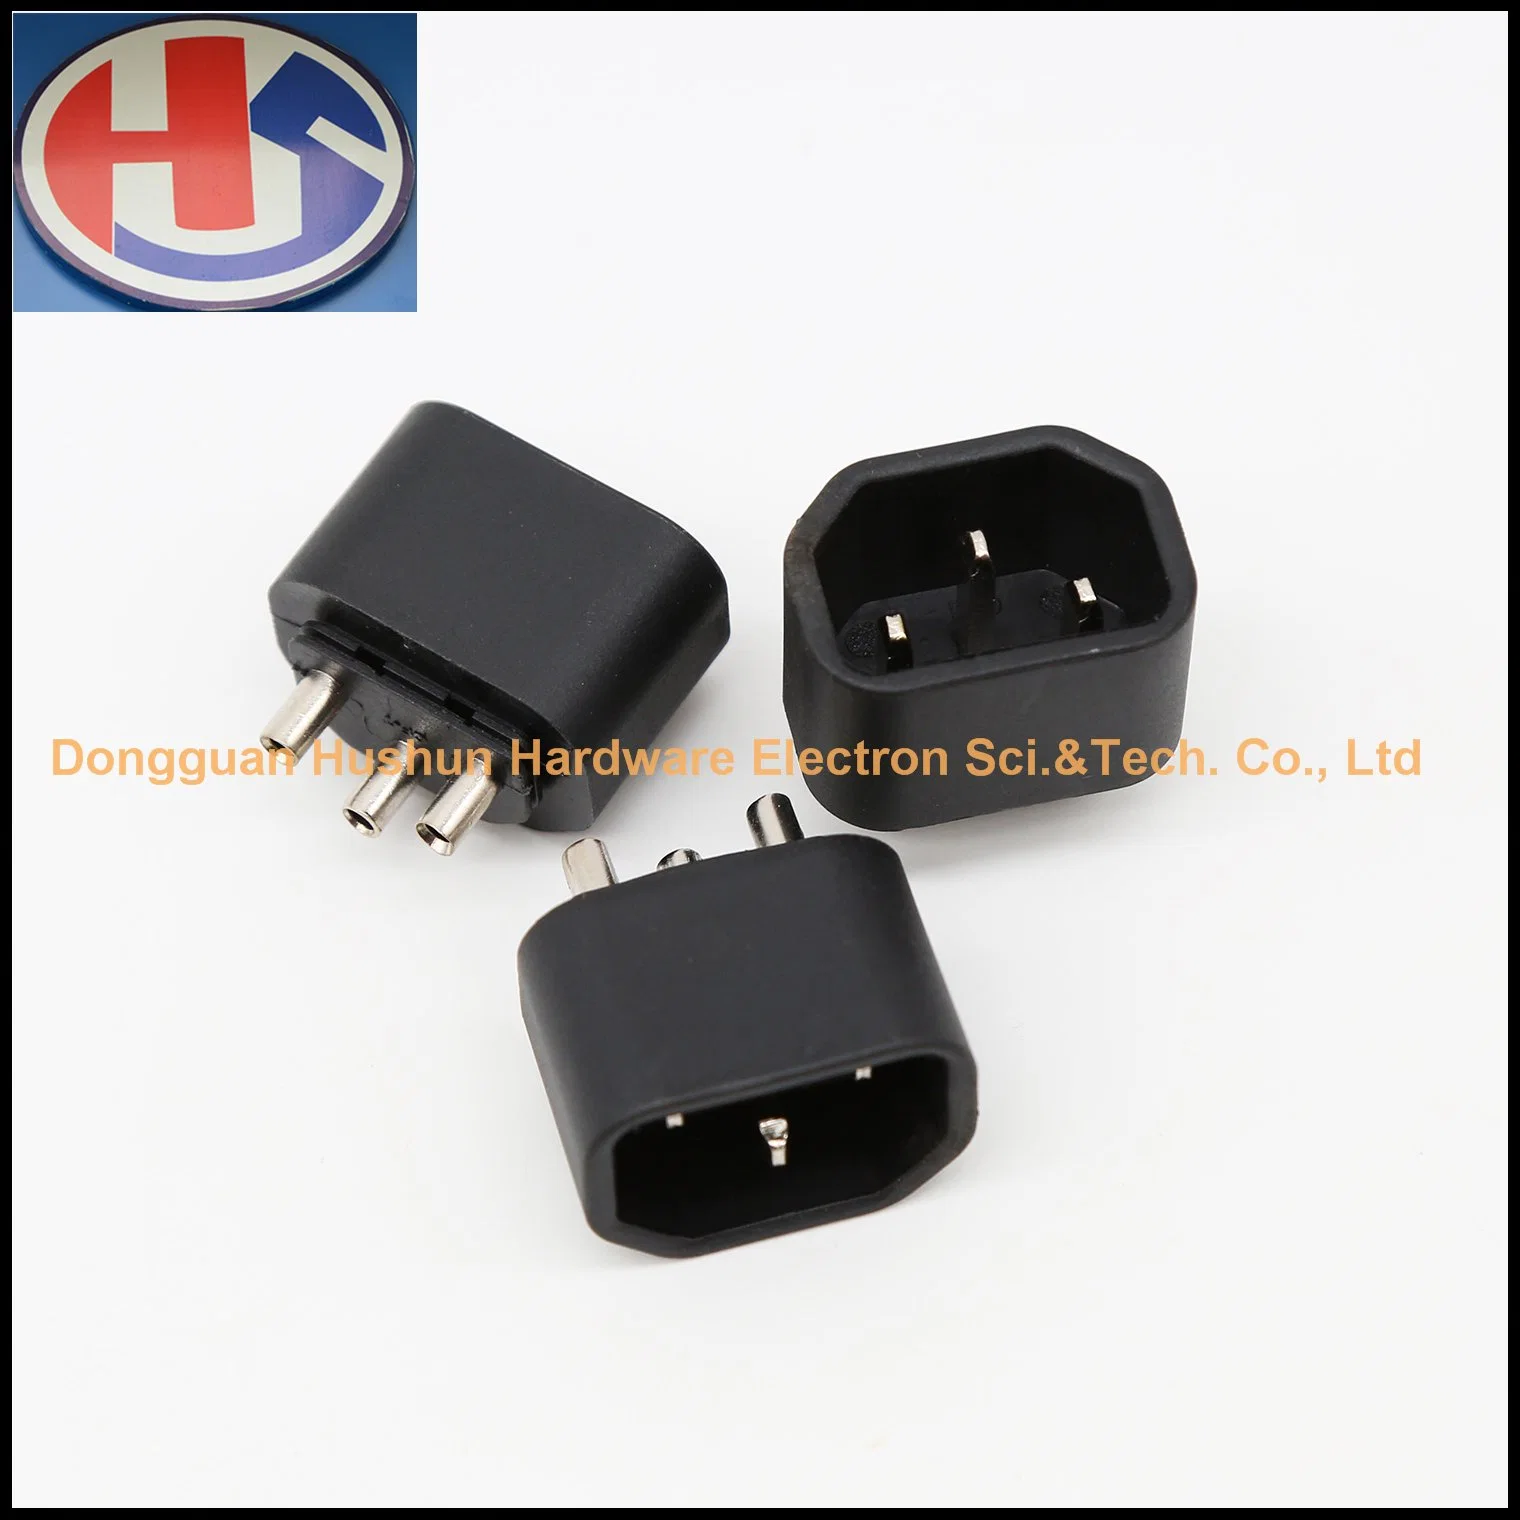 C14 Male Connector, IEC C14 Female Connector, C13 C14 Connector